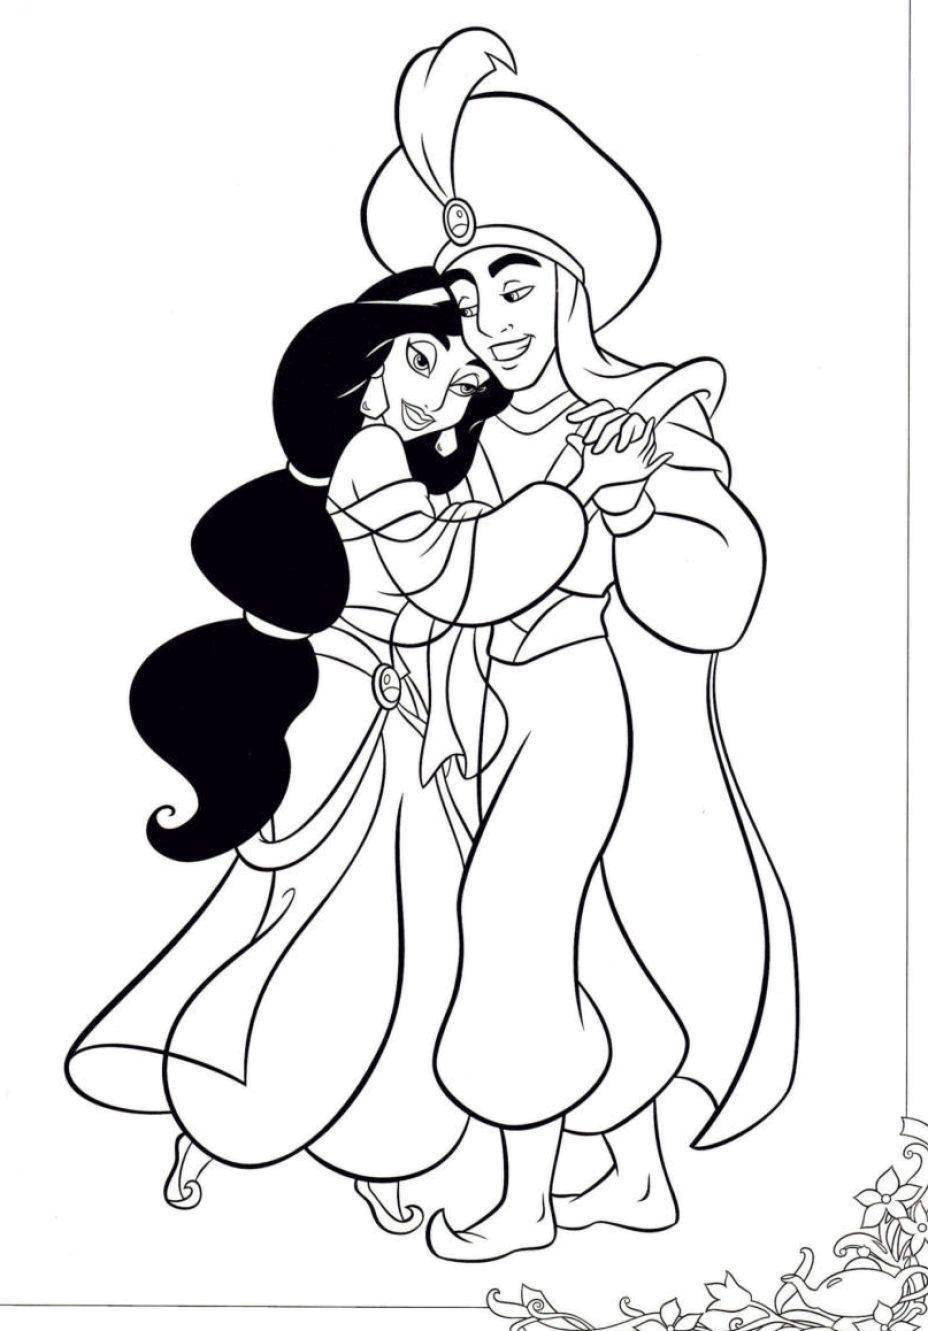 Coloring Aladdin and Jasmine get married. Category Wedding. Tags:  Wedding, dress, bride, groom.